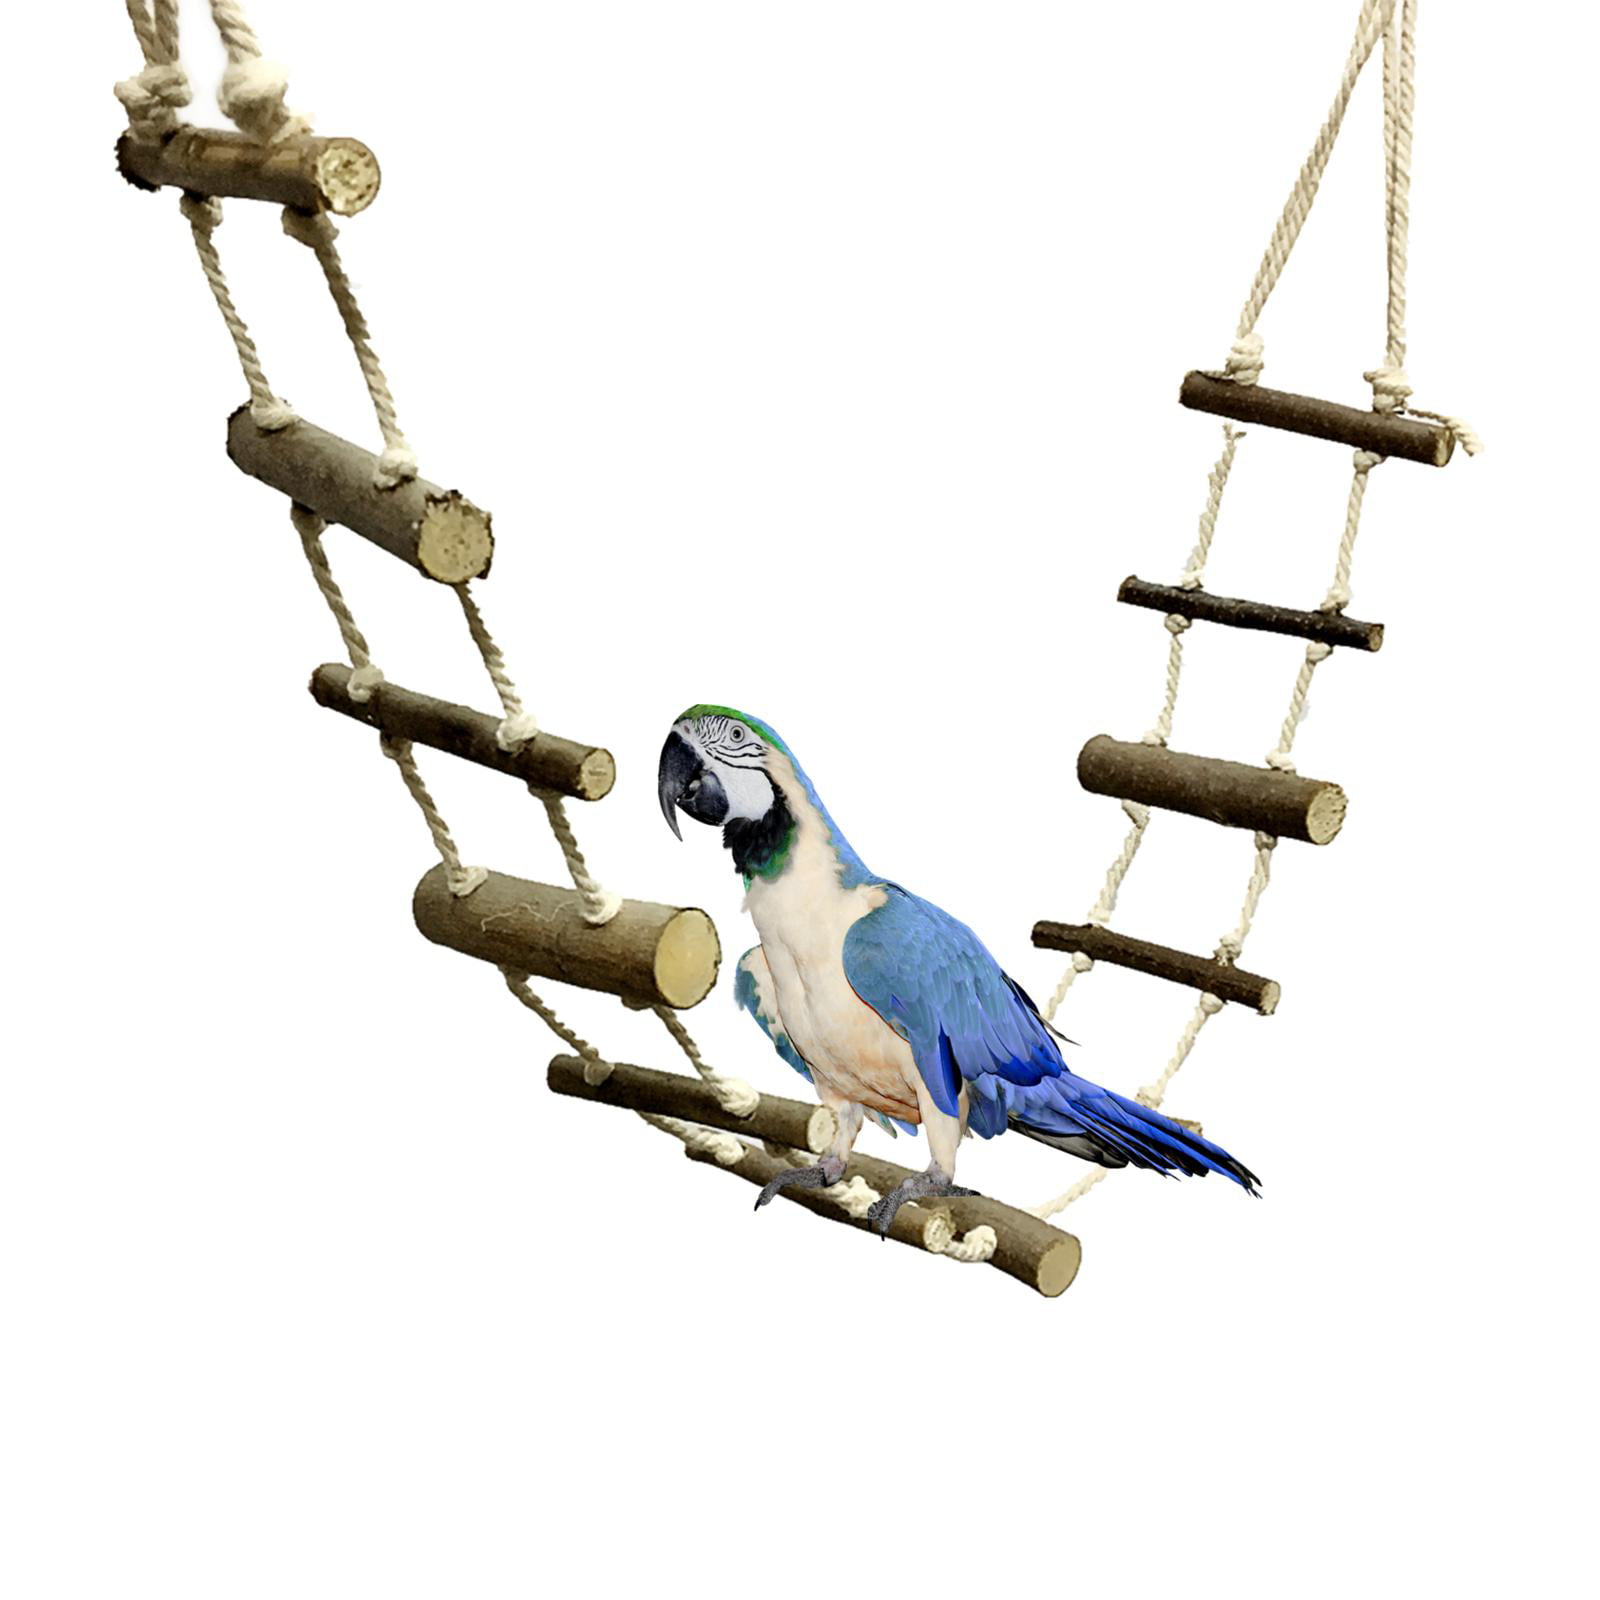 New Funny Hanging Ladder Swing Bridge Bird Parrot Hamster Rat Cage Exercise Toys 